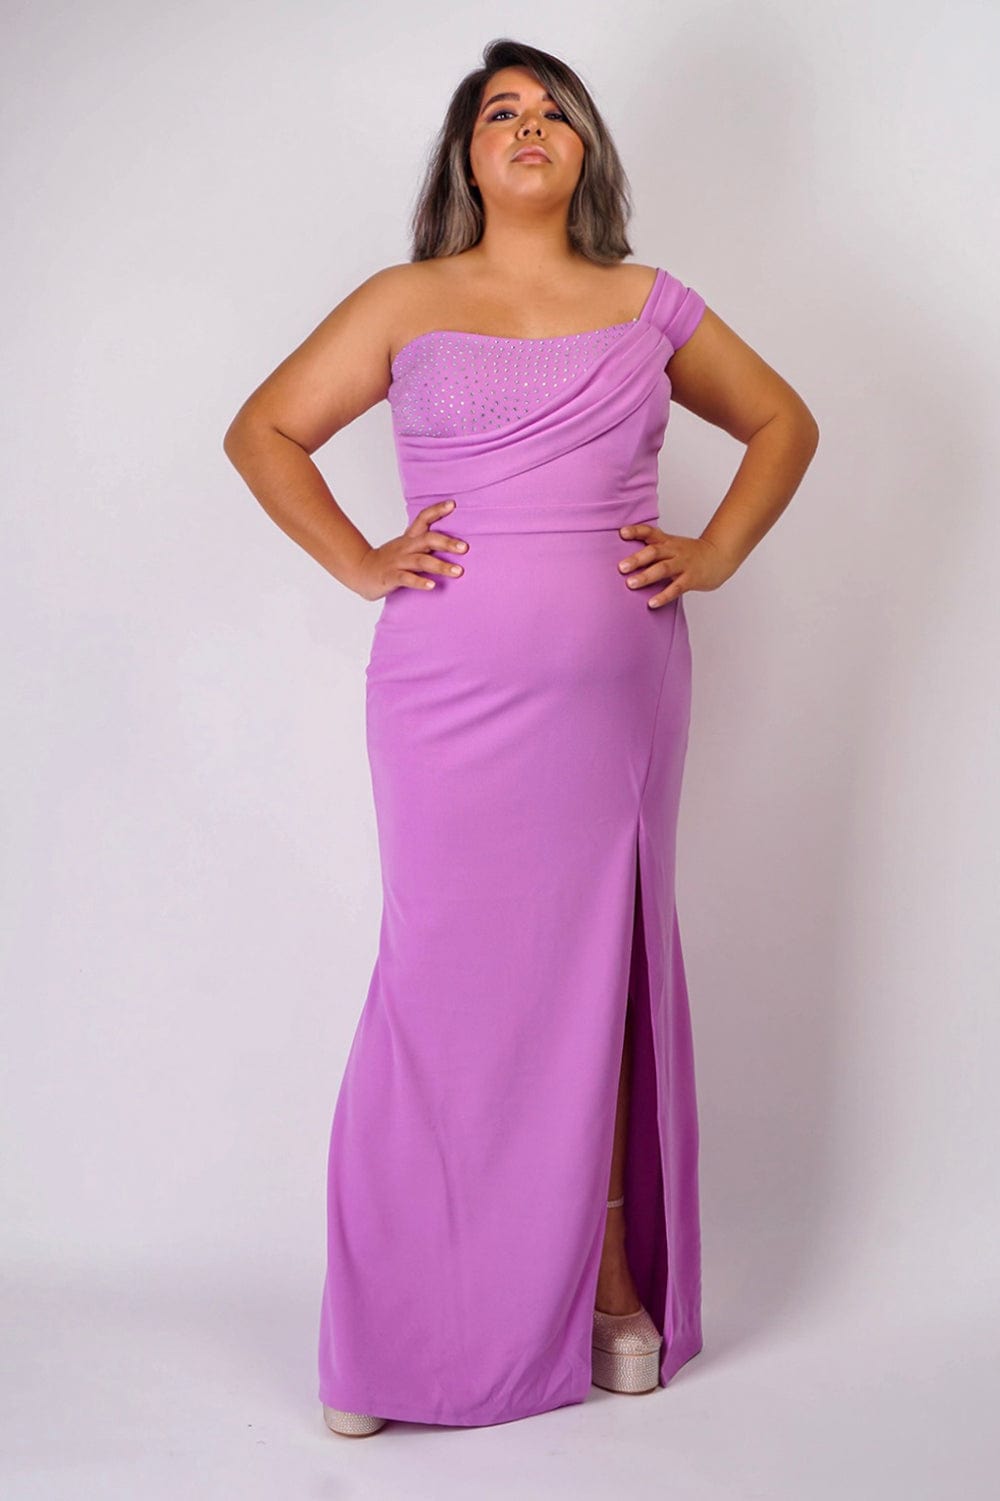 DCD GOWNS Plus Lavender One Shoulder Drape with Rhinestone Gown